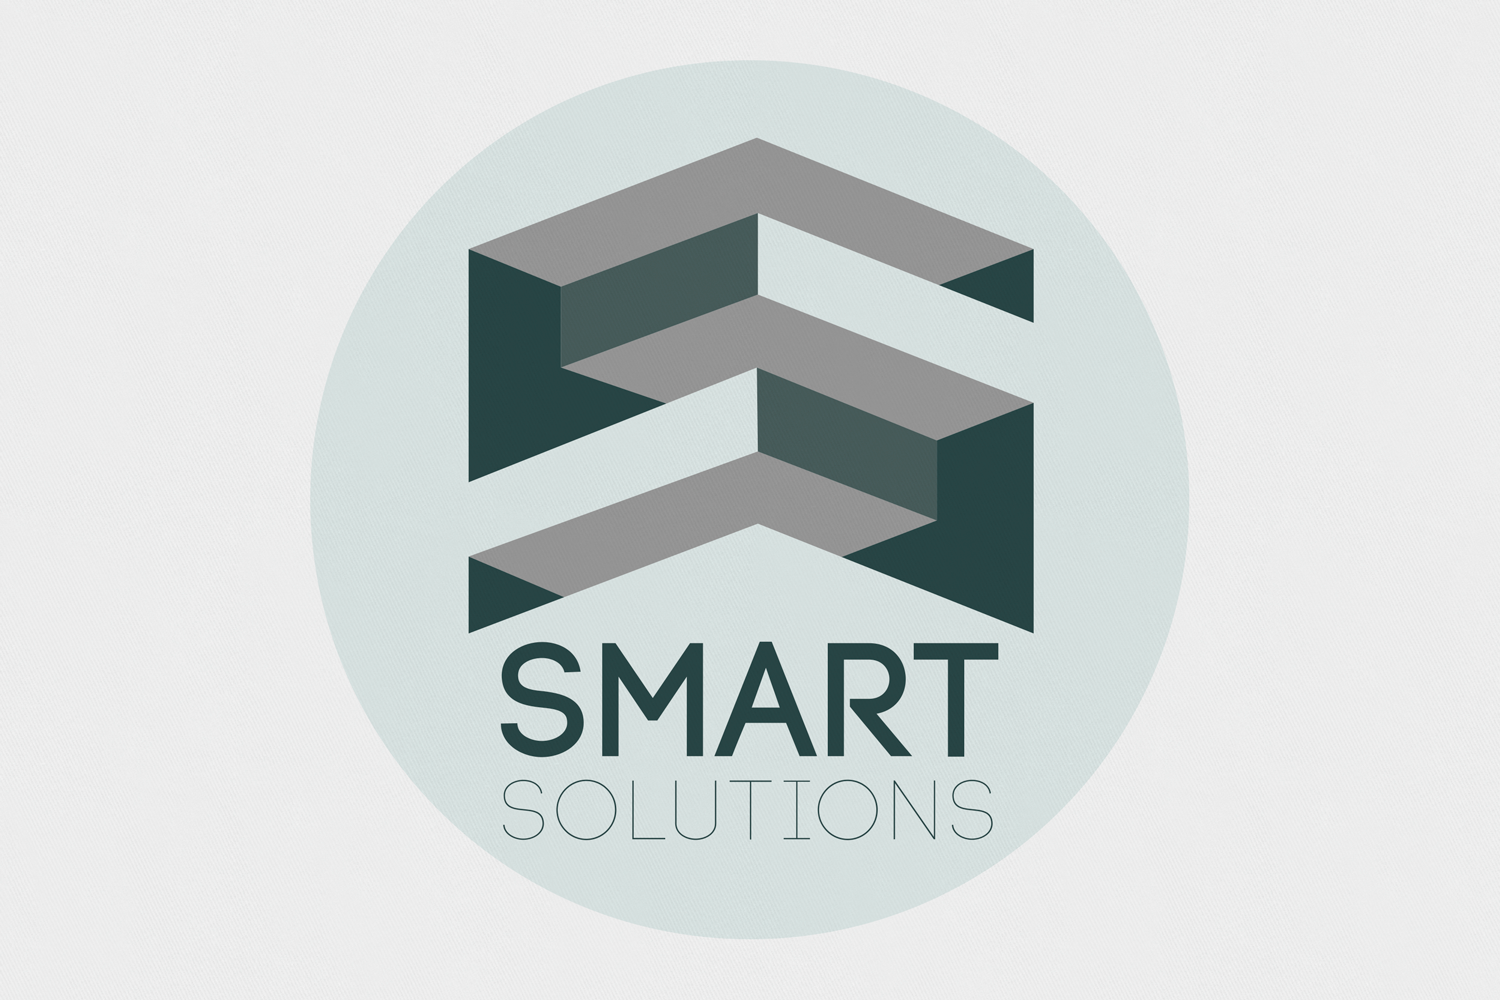 The SMART Solution